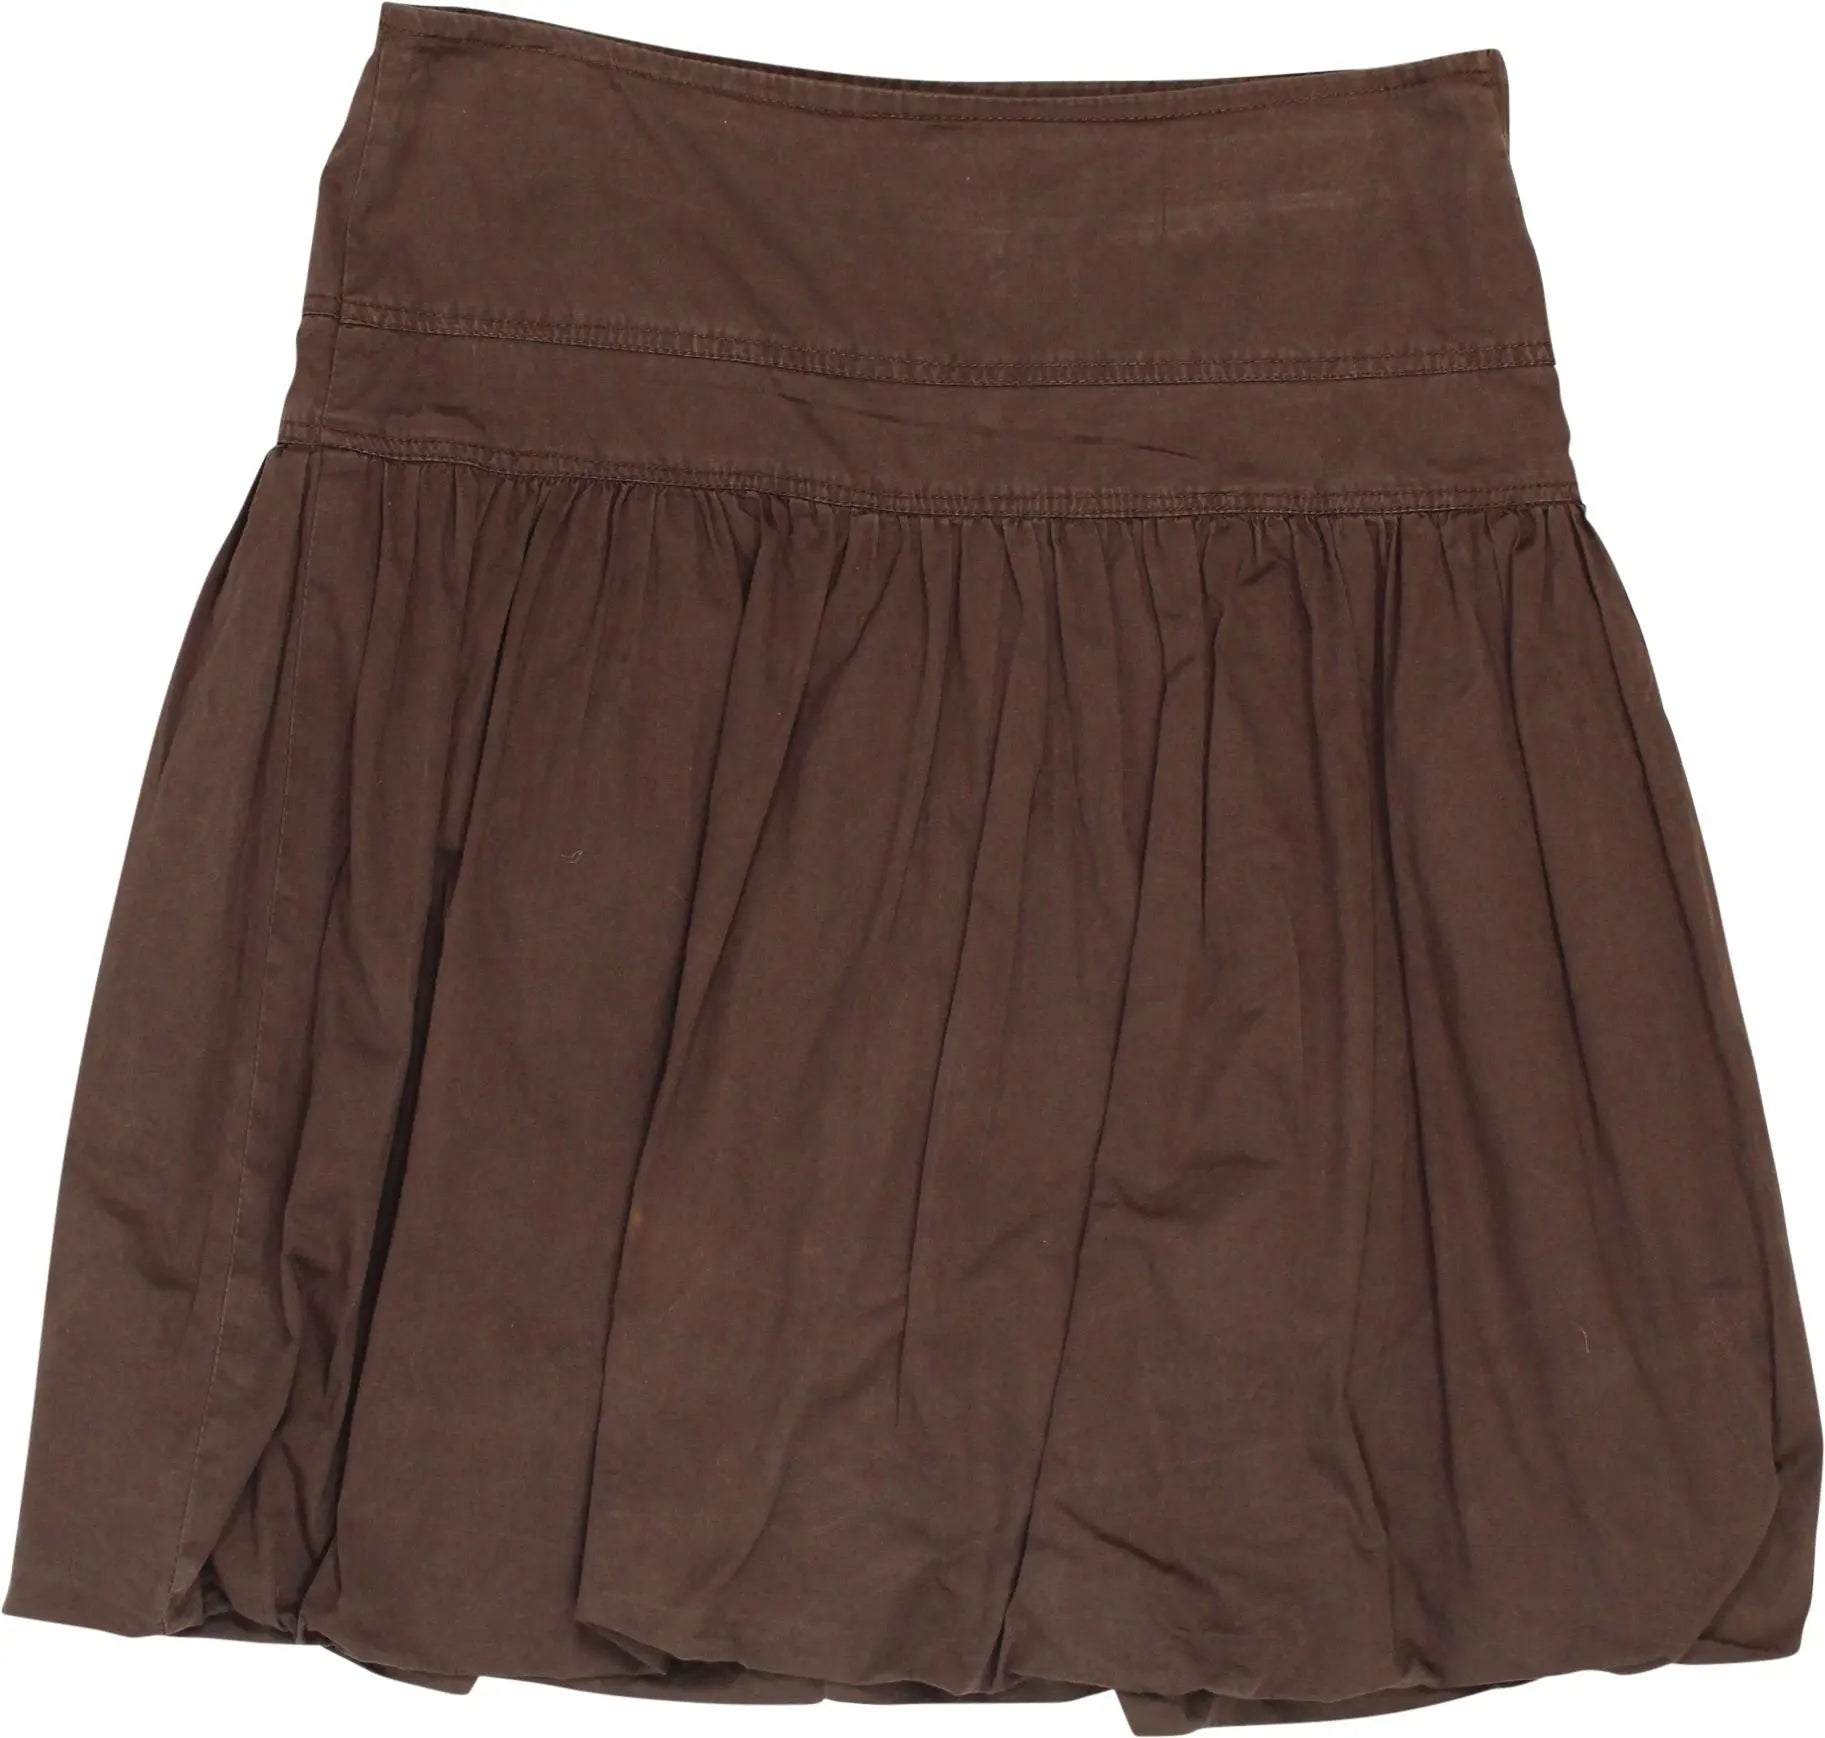 Only - Brown Skirt- ThriftTale.com - Vintage and second handclothing